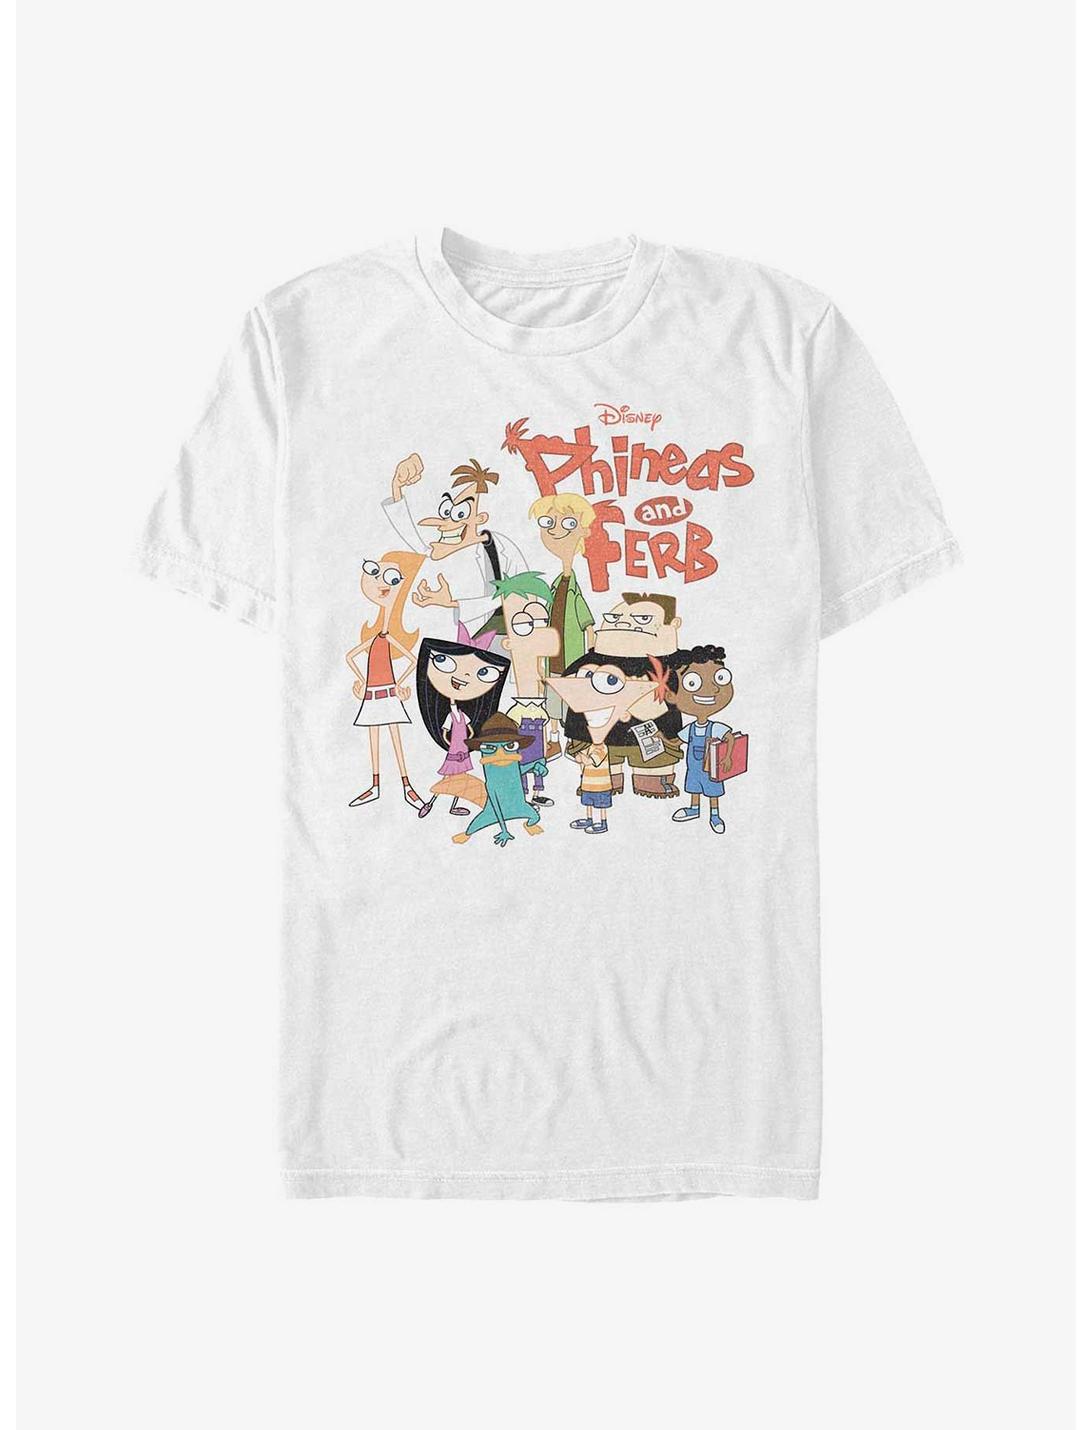 Disney Phineas Ferb The Group Extra Soft T-Shirt, WHITE, hi-res